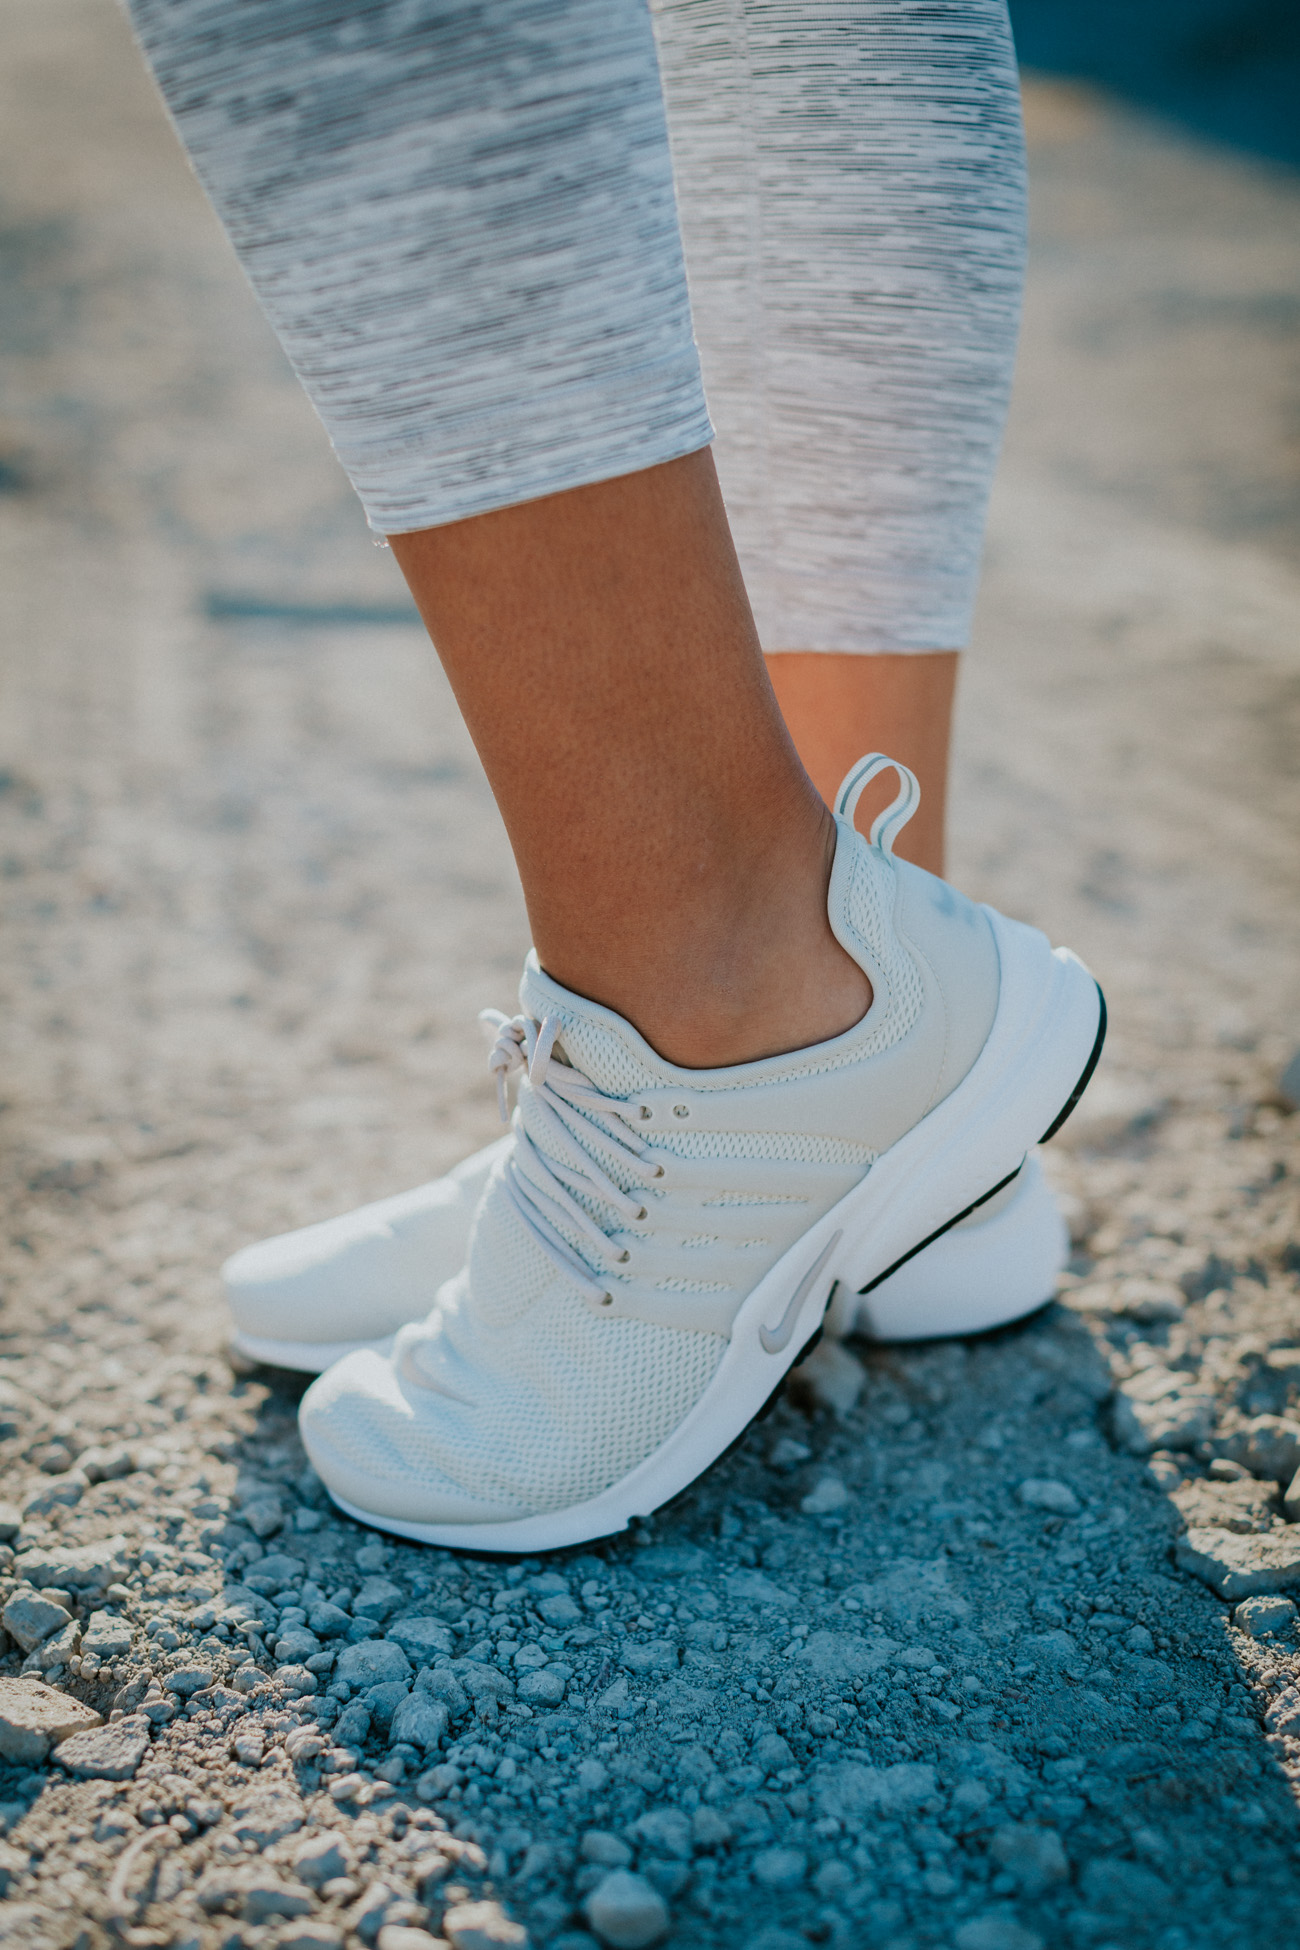 nike air presto sneaker, white heathered leggings, lululemon high times pant, lululemon wunder under pant,  lululemon activewear, alo yoga edge capri, nike id, nike roshe one flyknits, athleisure, cute activewear outfit, a southern drawl workouts, weekly workout routine, weekly workouts, weekly exercises, polar a360 watch, cute activewear, cute workout outfit, running routine, girl gains, fitness inspiration, nike fitspo, athleisure, nike athleisure outfit // grace wainwright a southern drawl